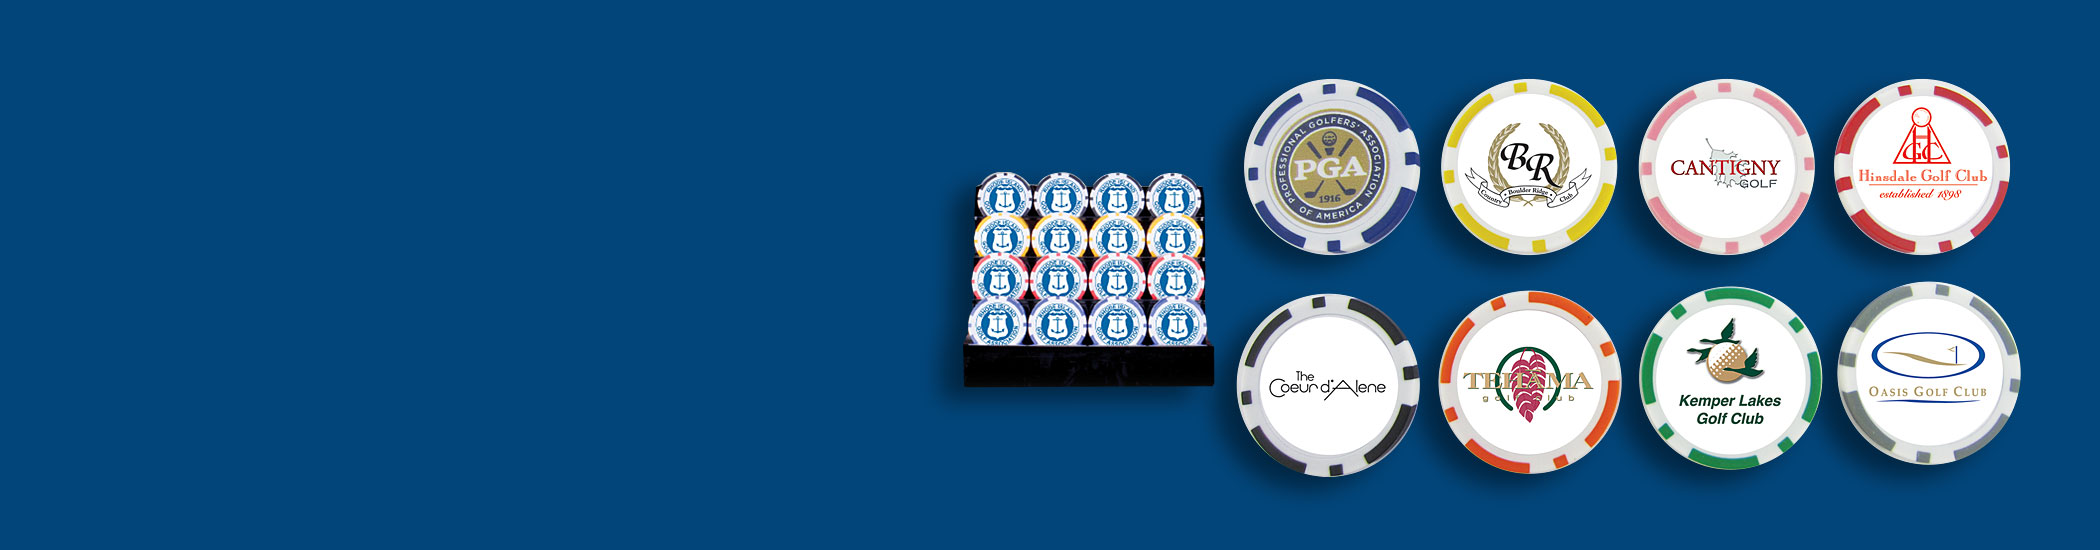 Poker Chips & Ball Markers